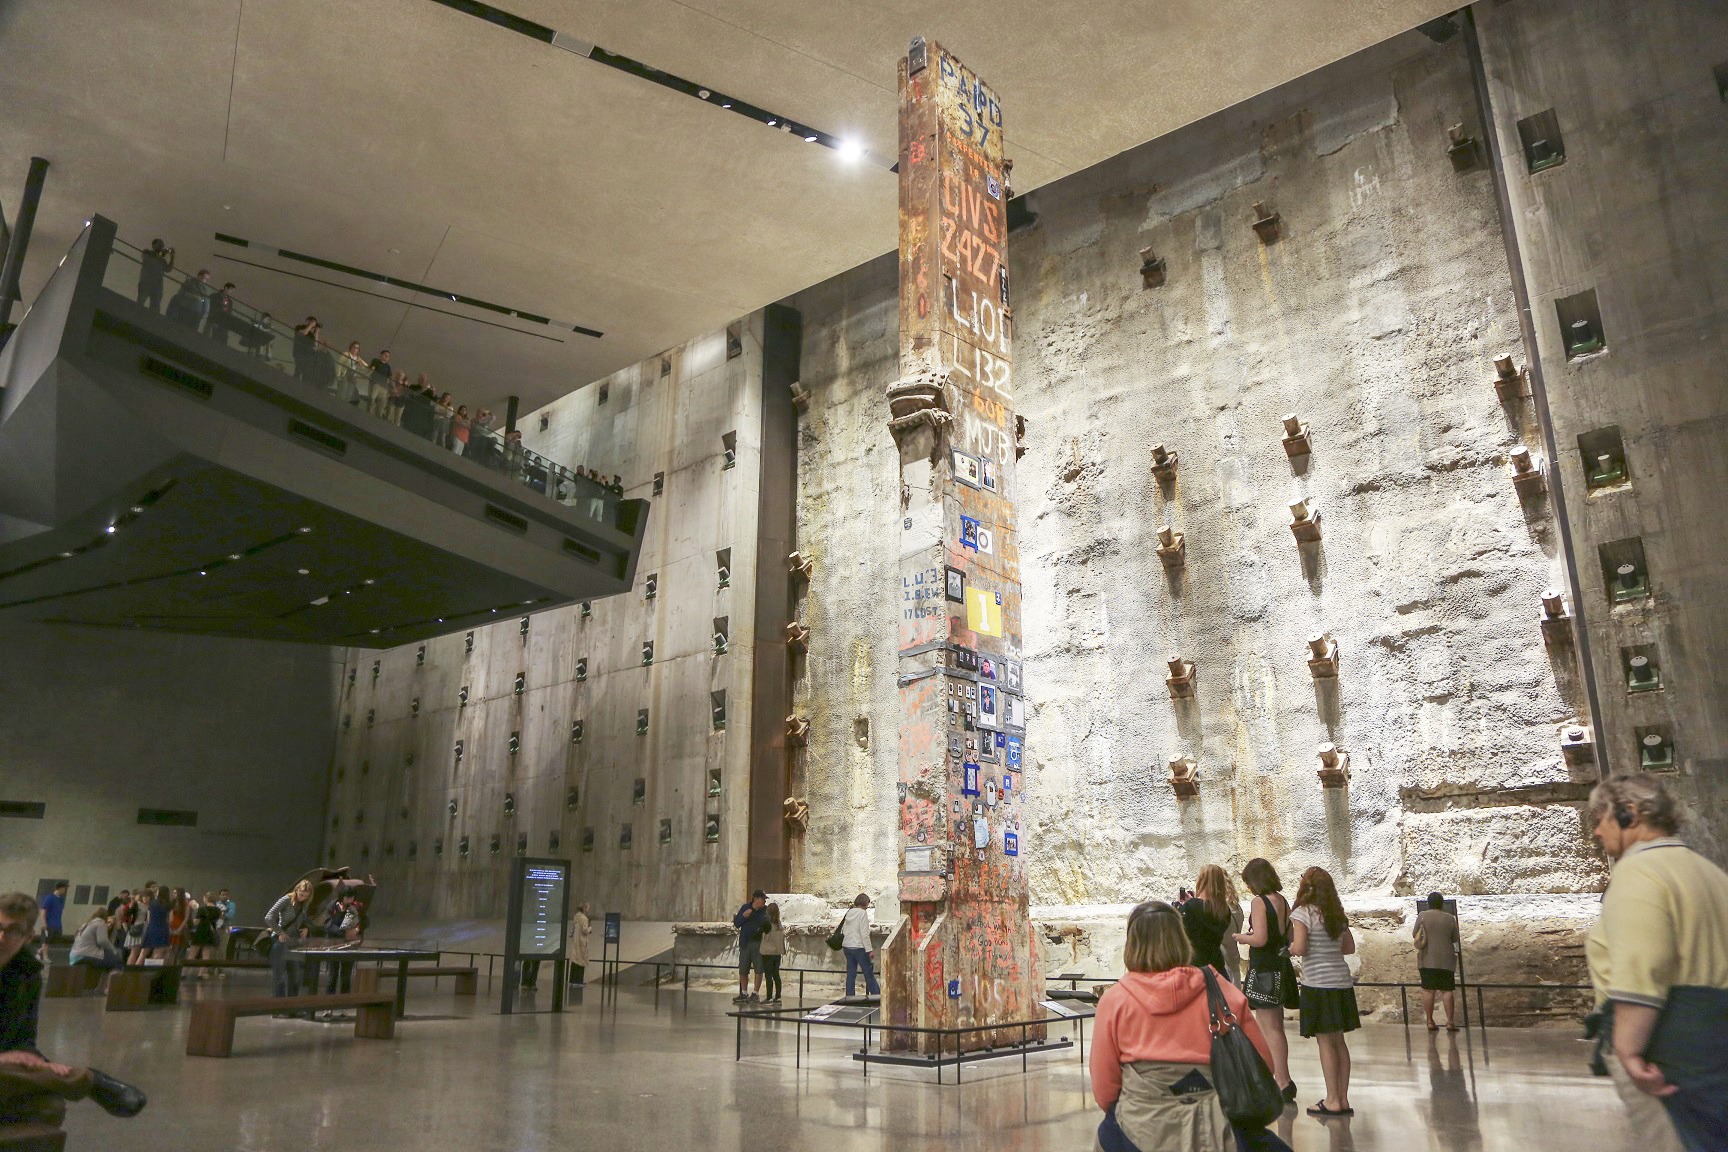 The Last Column stands over Foundation Hall as visitors walk by it. The illuminated slurry wall stands in the background.